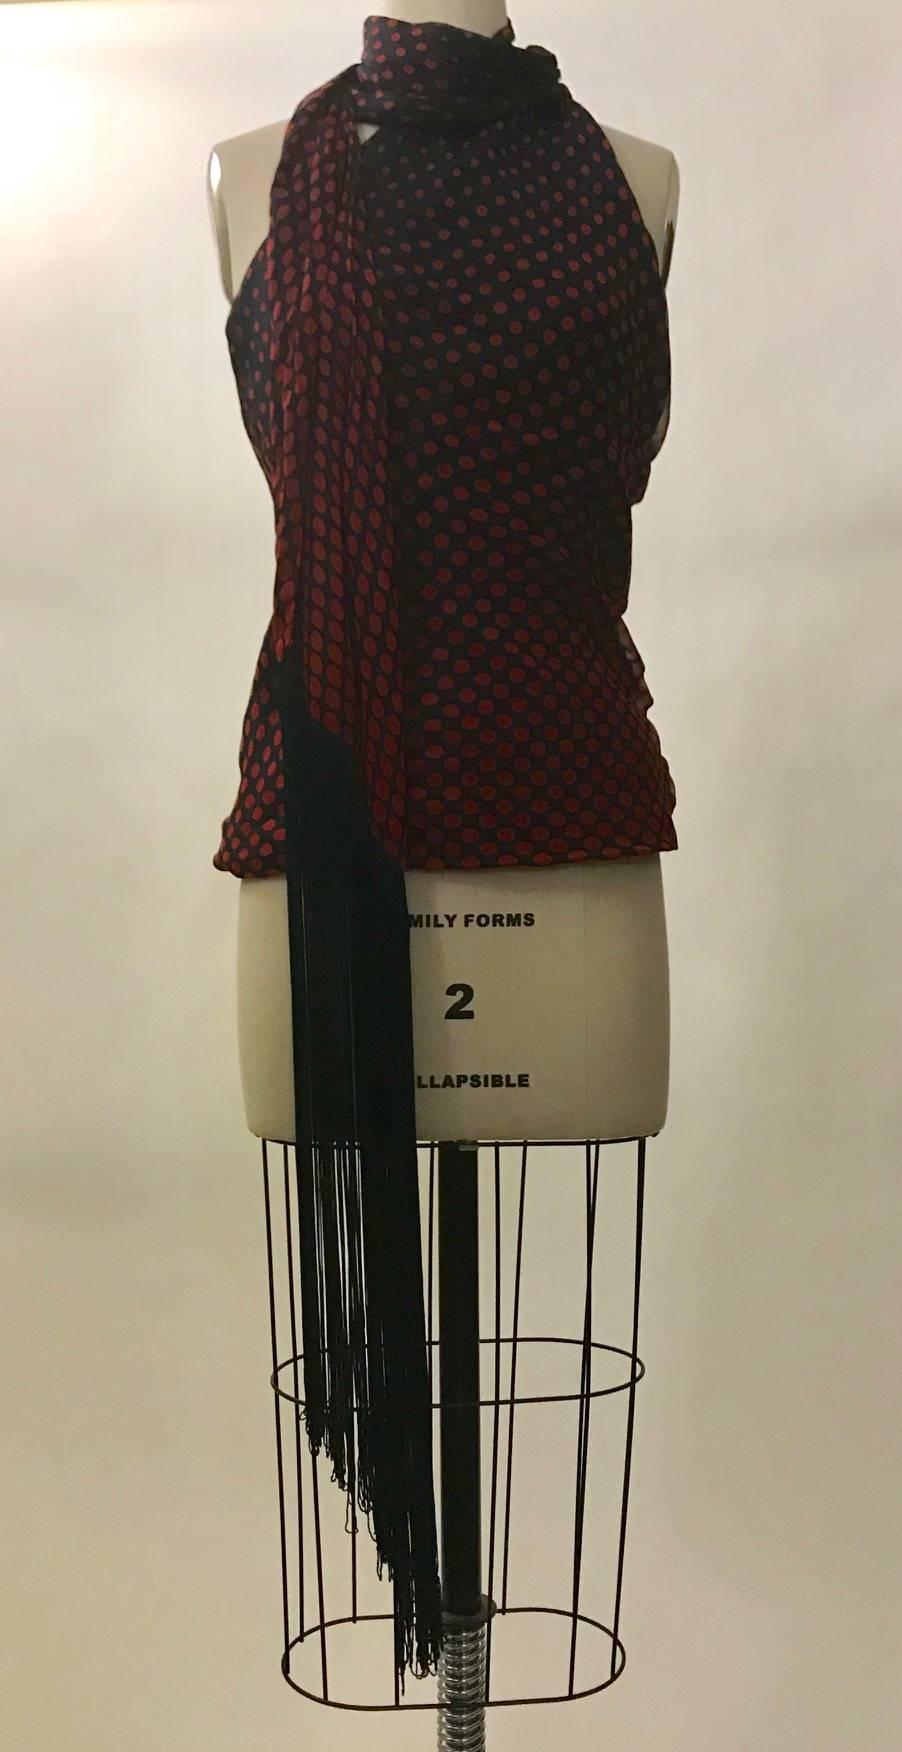 Alexander McQueen red and black polka dot halter top with attached scarf that wraps around the neck to close (designed to stay up by just wrapping the scarf, those desiring a little extra security may want to add a brooch.) Long fringed trim at end